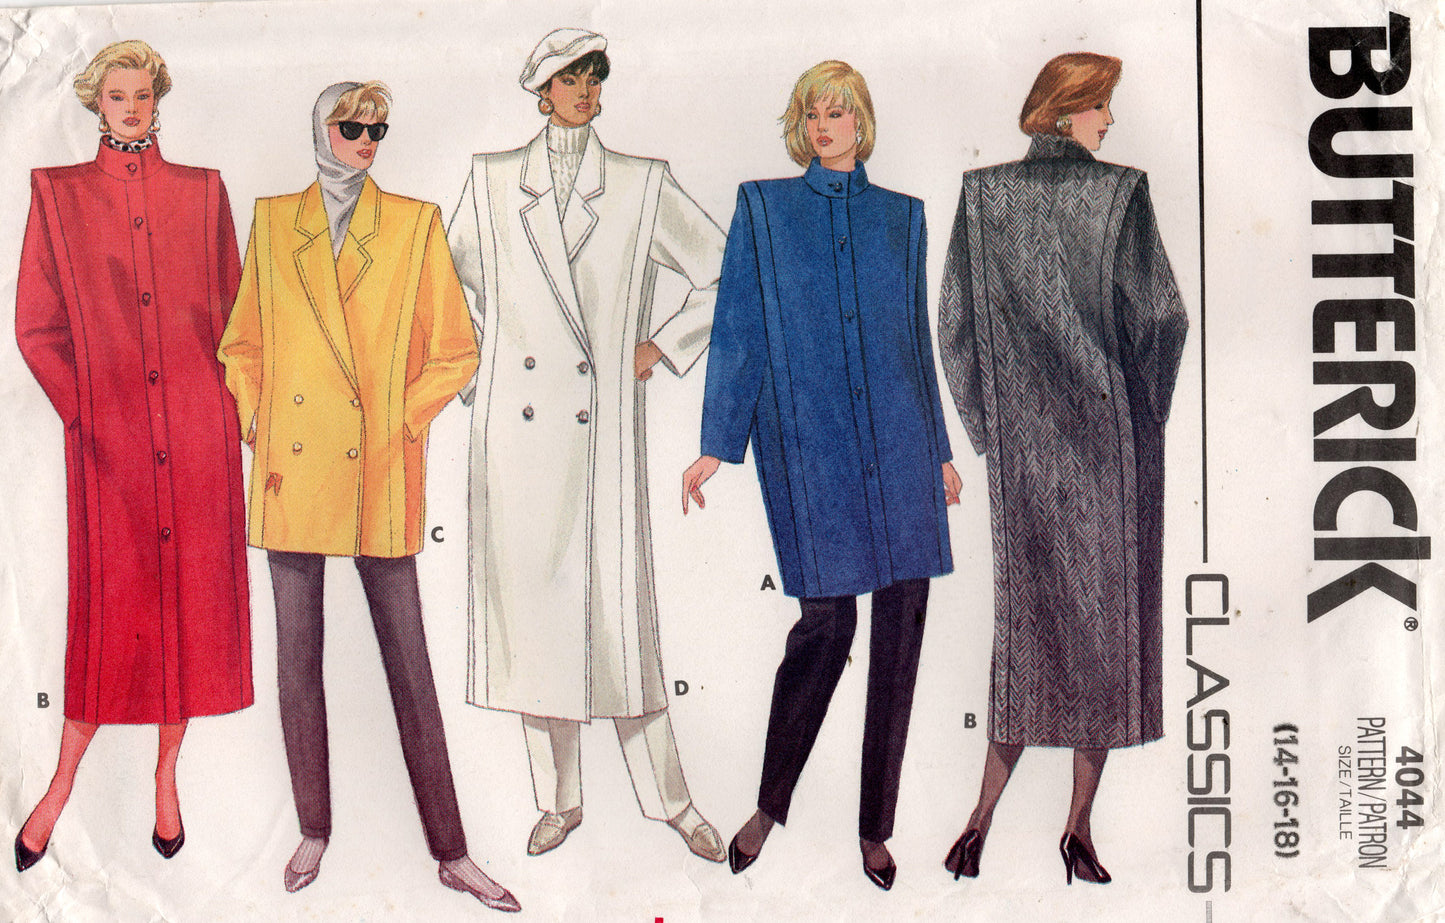 Butterick 4044 Womens Lined Overcoat 1980s Vintage Sewing Pattern Size 14 - 18 UNCUT Factory Folded